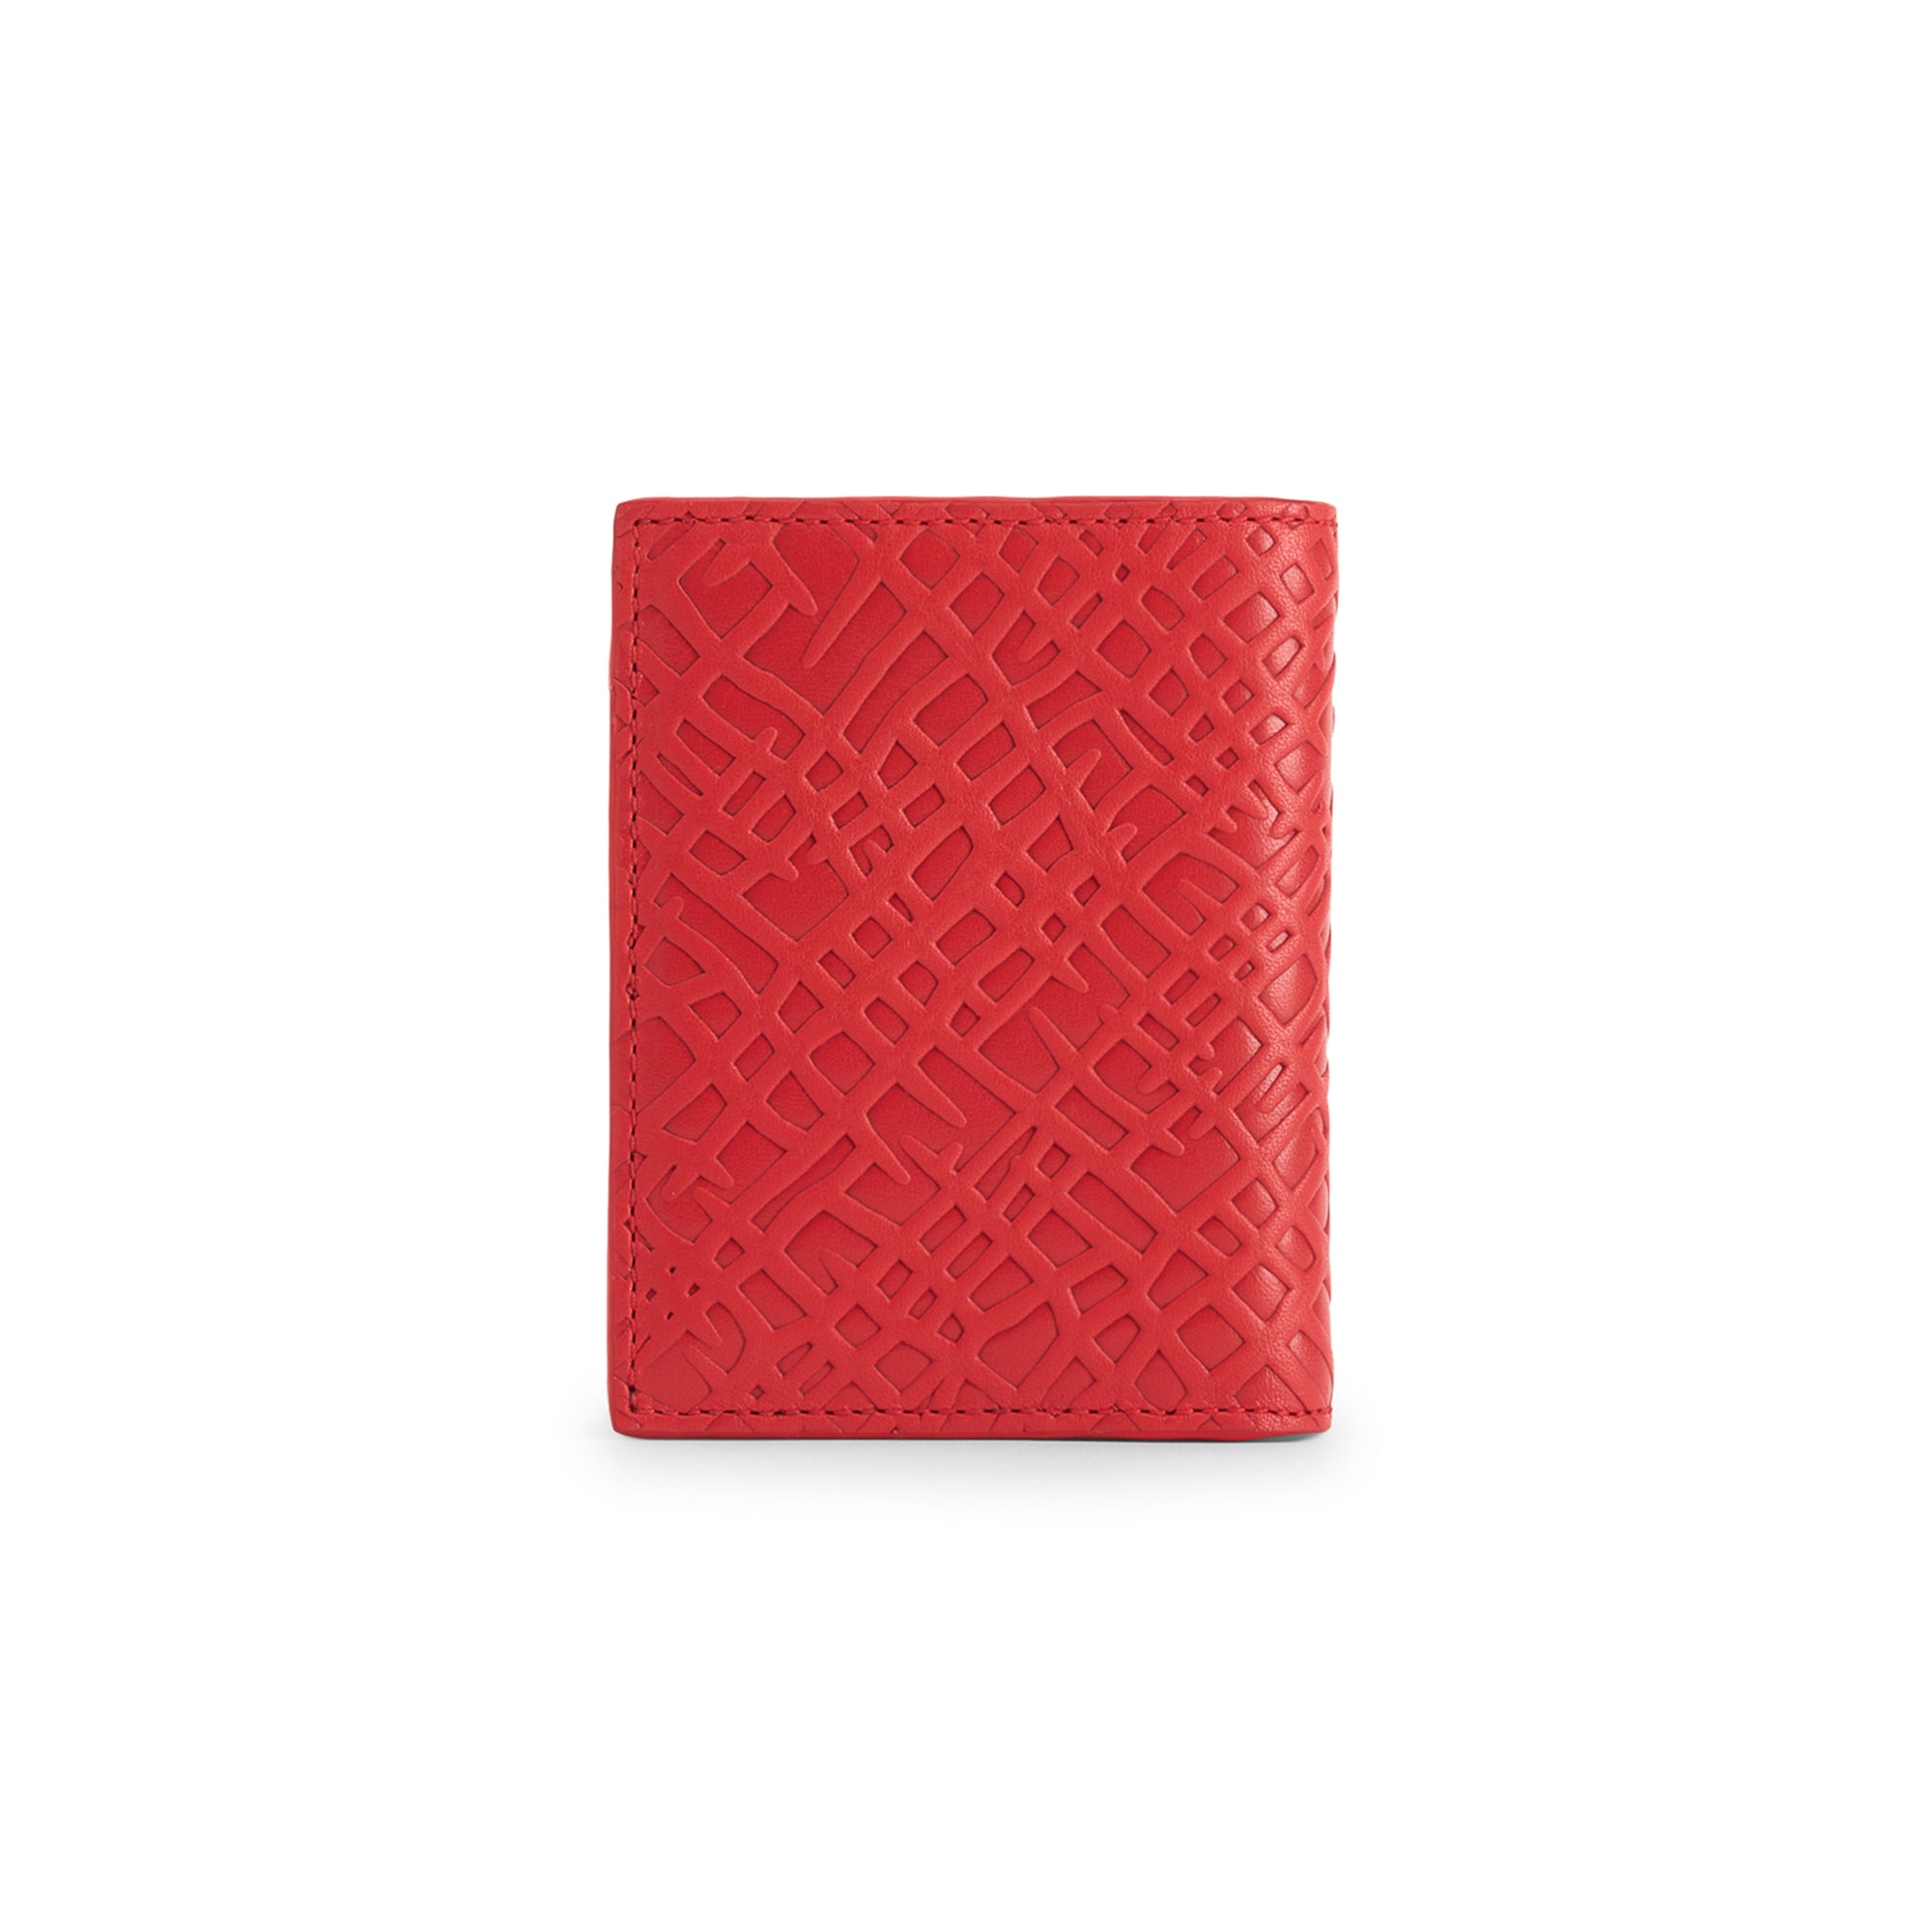 CDG Wallet - Embossed Roots Bifold Wallet - (Red SA0641ER) view 3